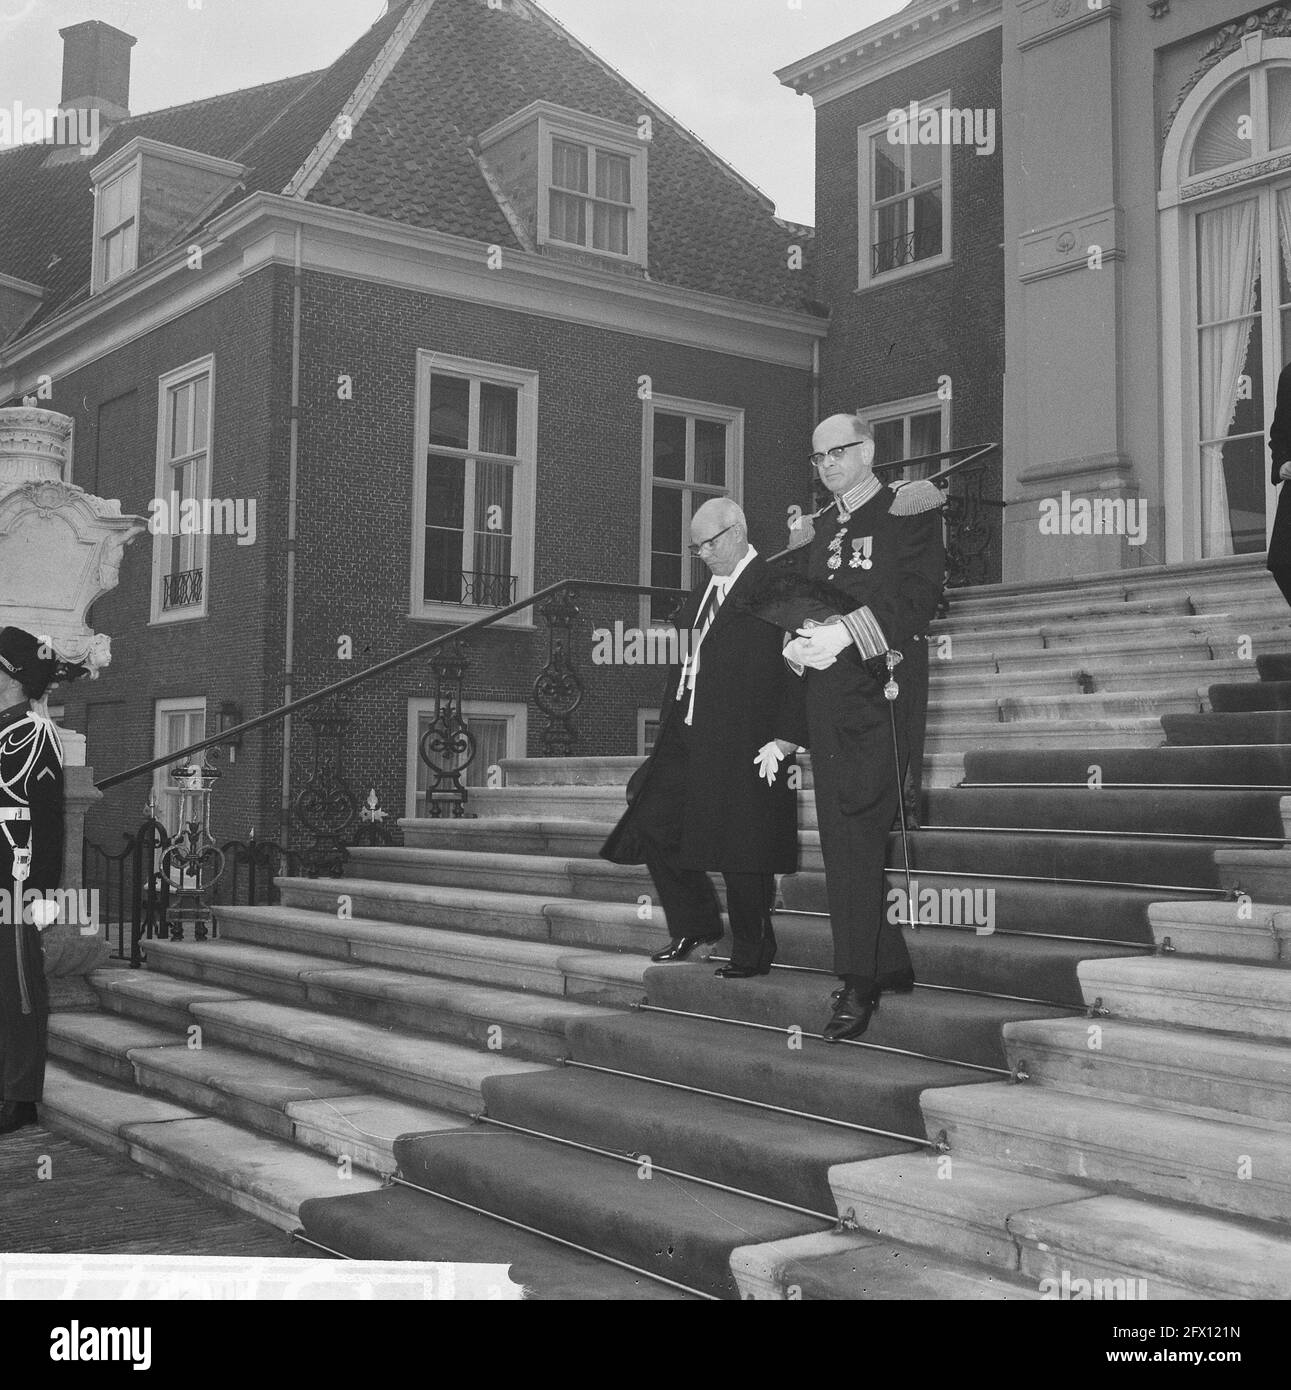 Queen Juliana receives at Paleis Huis ten Bosch the ambassador of the Dominican Republic, Dr. Manuel Antonio Duran Barrera, November 28, 1963, ambassadors, diplomats, palaces, The Netherlands, 20th century press agency photo, news to remember, documentary, historic photography 1945-1990, visual stories, human history of the Twentieth Century, capturing moments in time Stock Photo